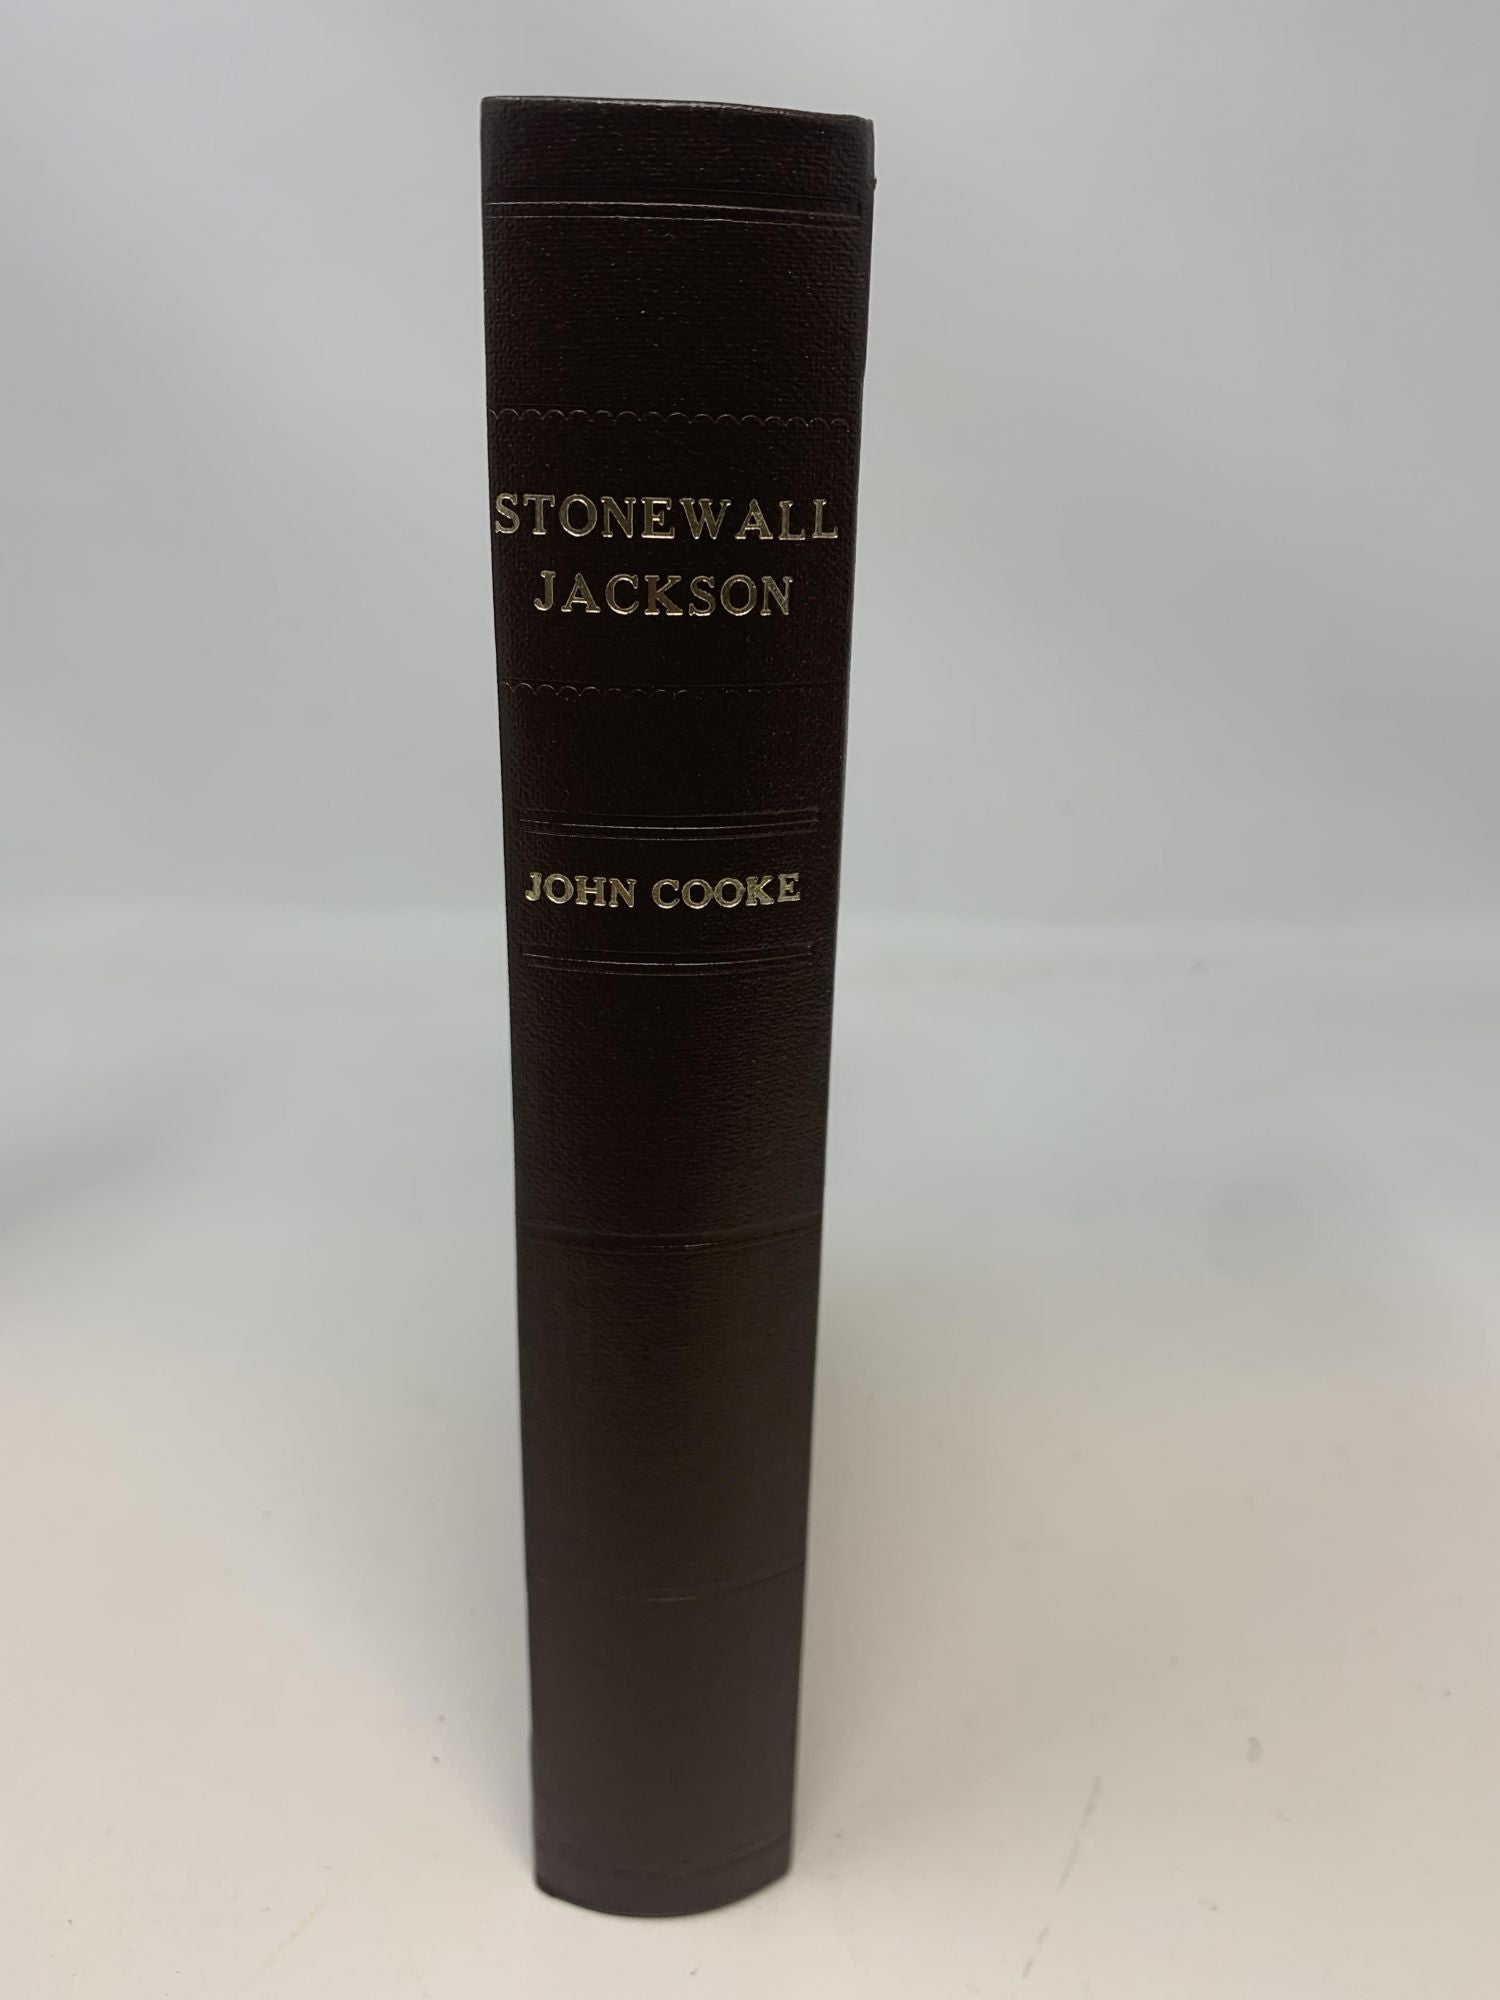 [By A Virginian] Cooke, John Eston - The Life of Stonewall Jackson. From Official Papers, Contemporary Narratives, and Personal Acquaintance